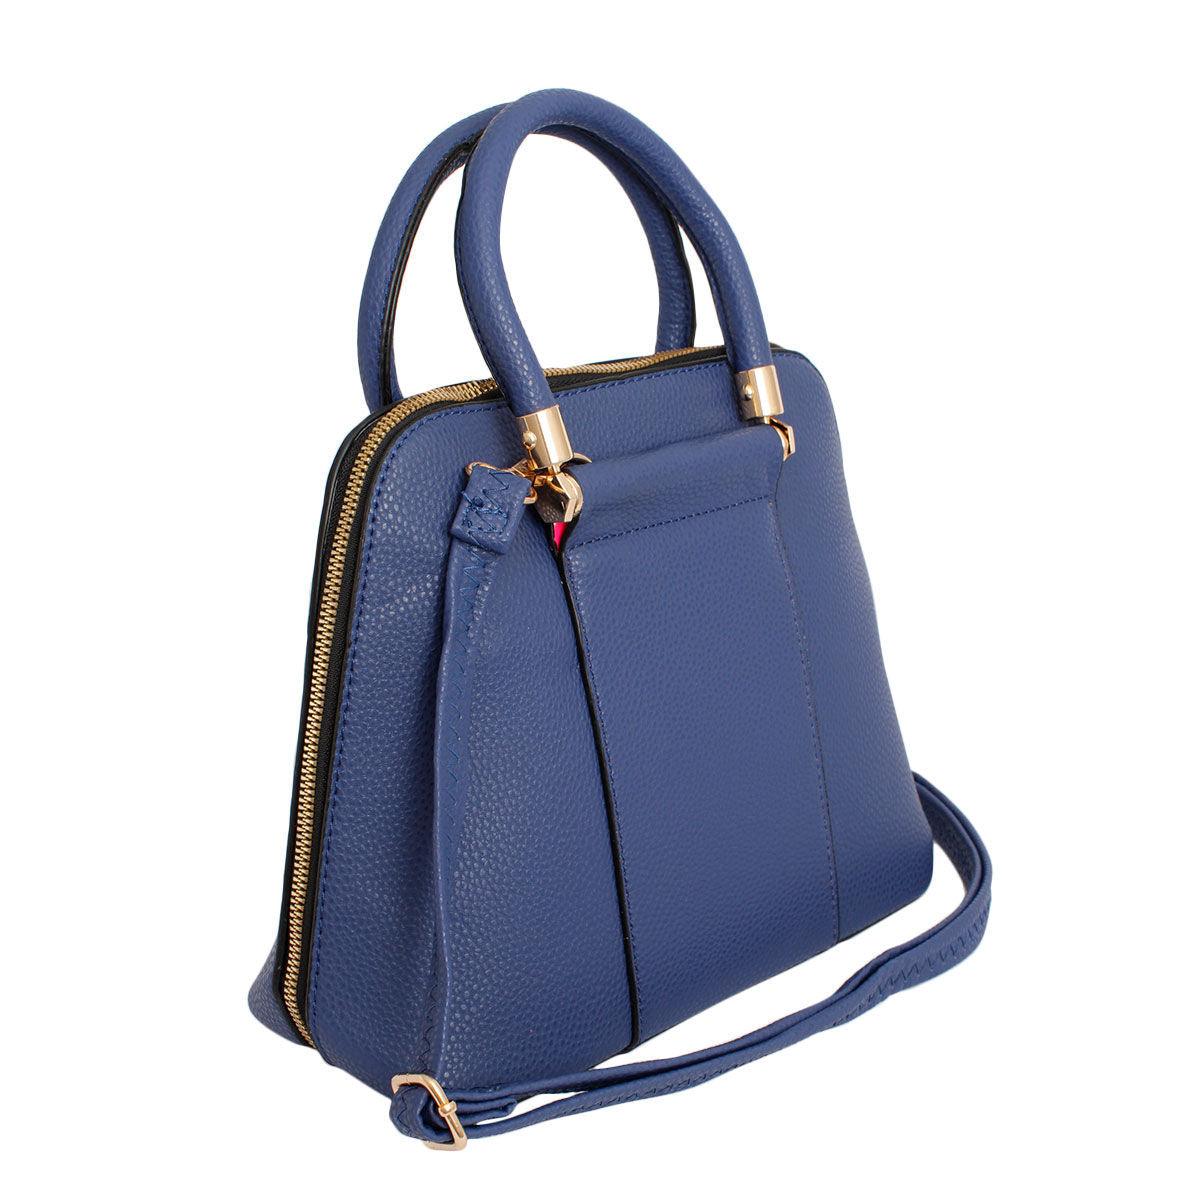 Must-Have Accessory: Chic Women's Blue Handbag Ensemble Coveted Classic